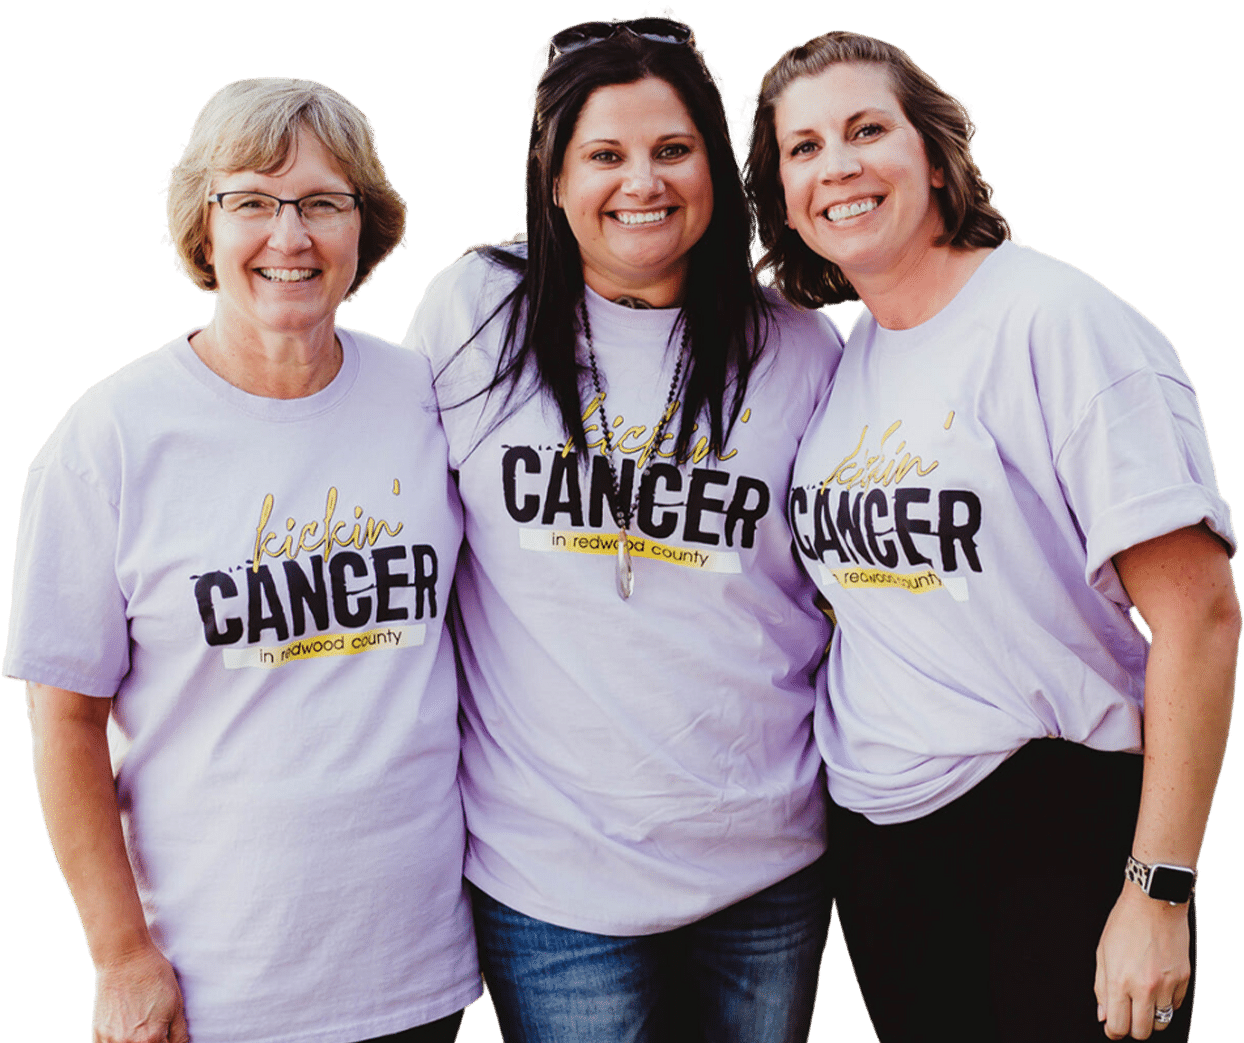 Three women proudly posing for a photo in Kickin' Cancer Redwood County t-shirts to raise awareness.